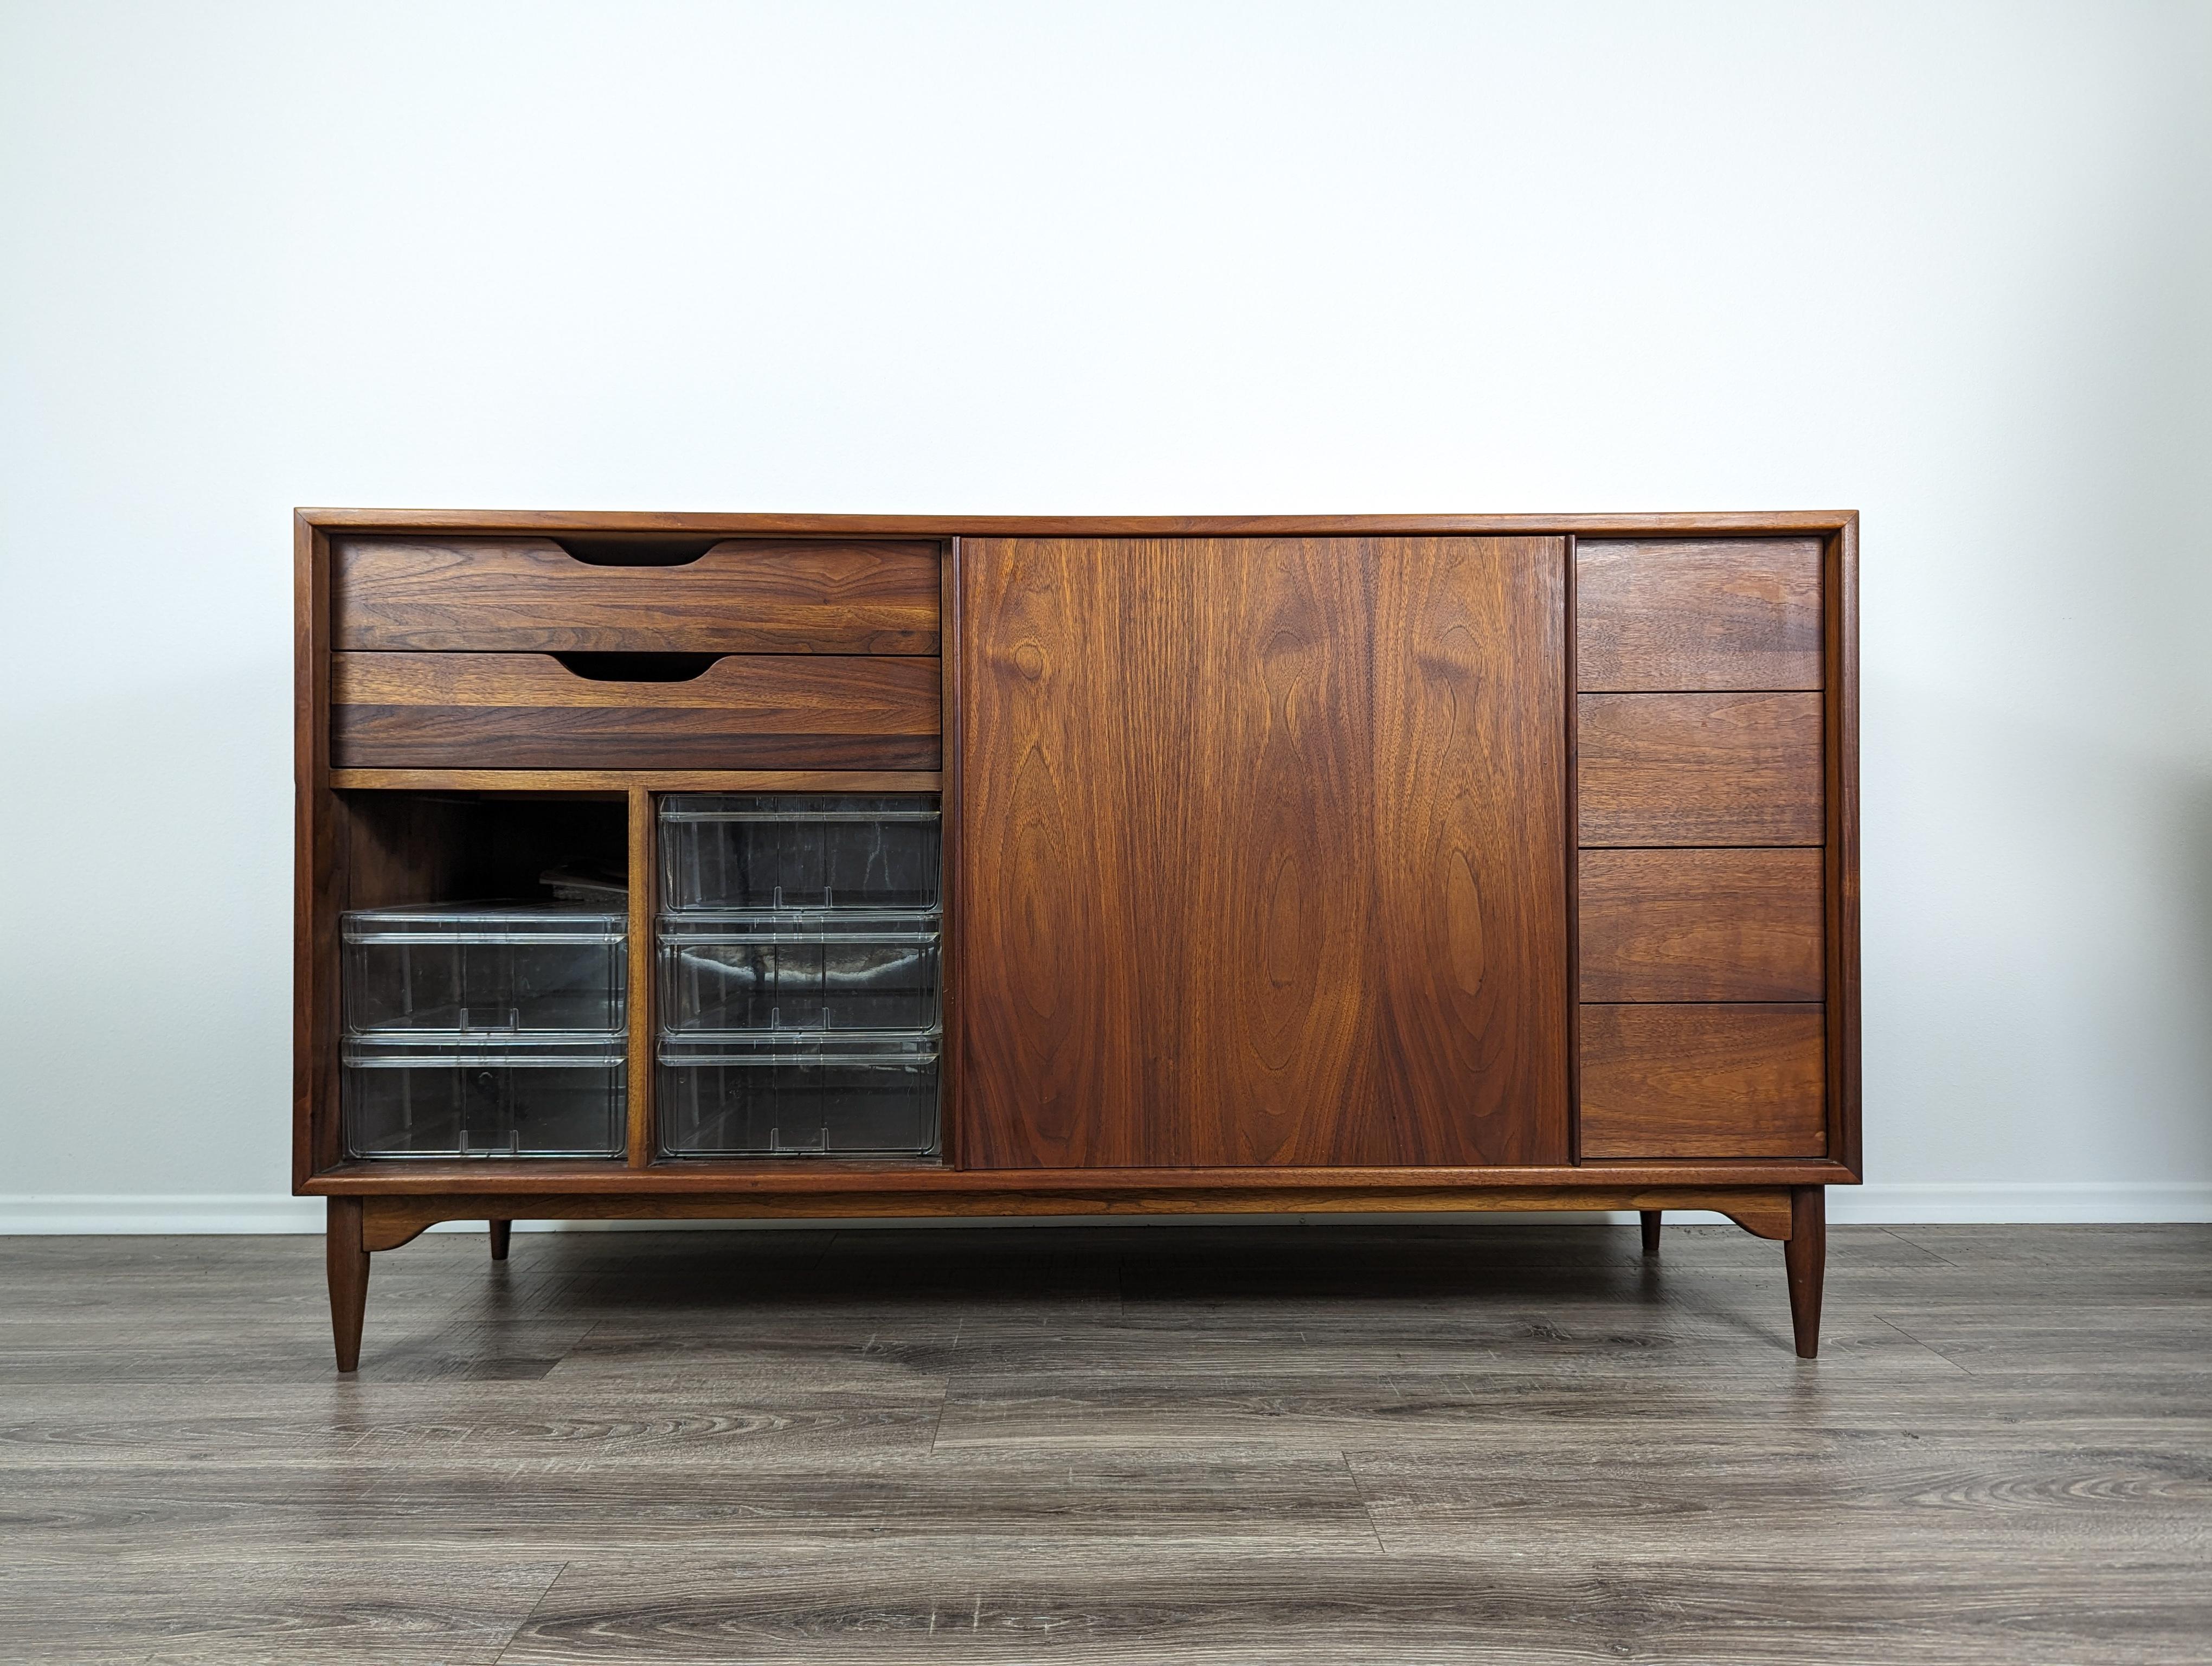 Step back in time with this stunning Mid Century Modern Walnut Dresser by renowned Brown Saltman. Masterfully crafted in the 1960s, this piece beautifully encapsulates the era's penchant for simplicity, functionality, and natural